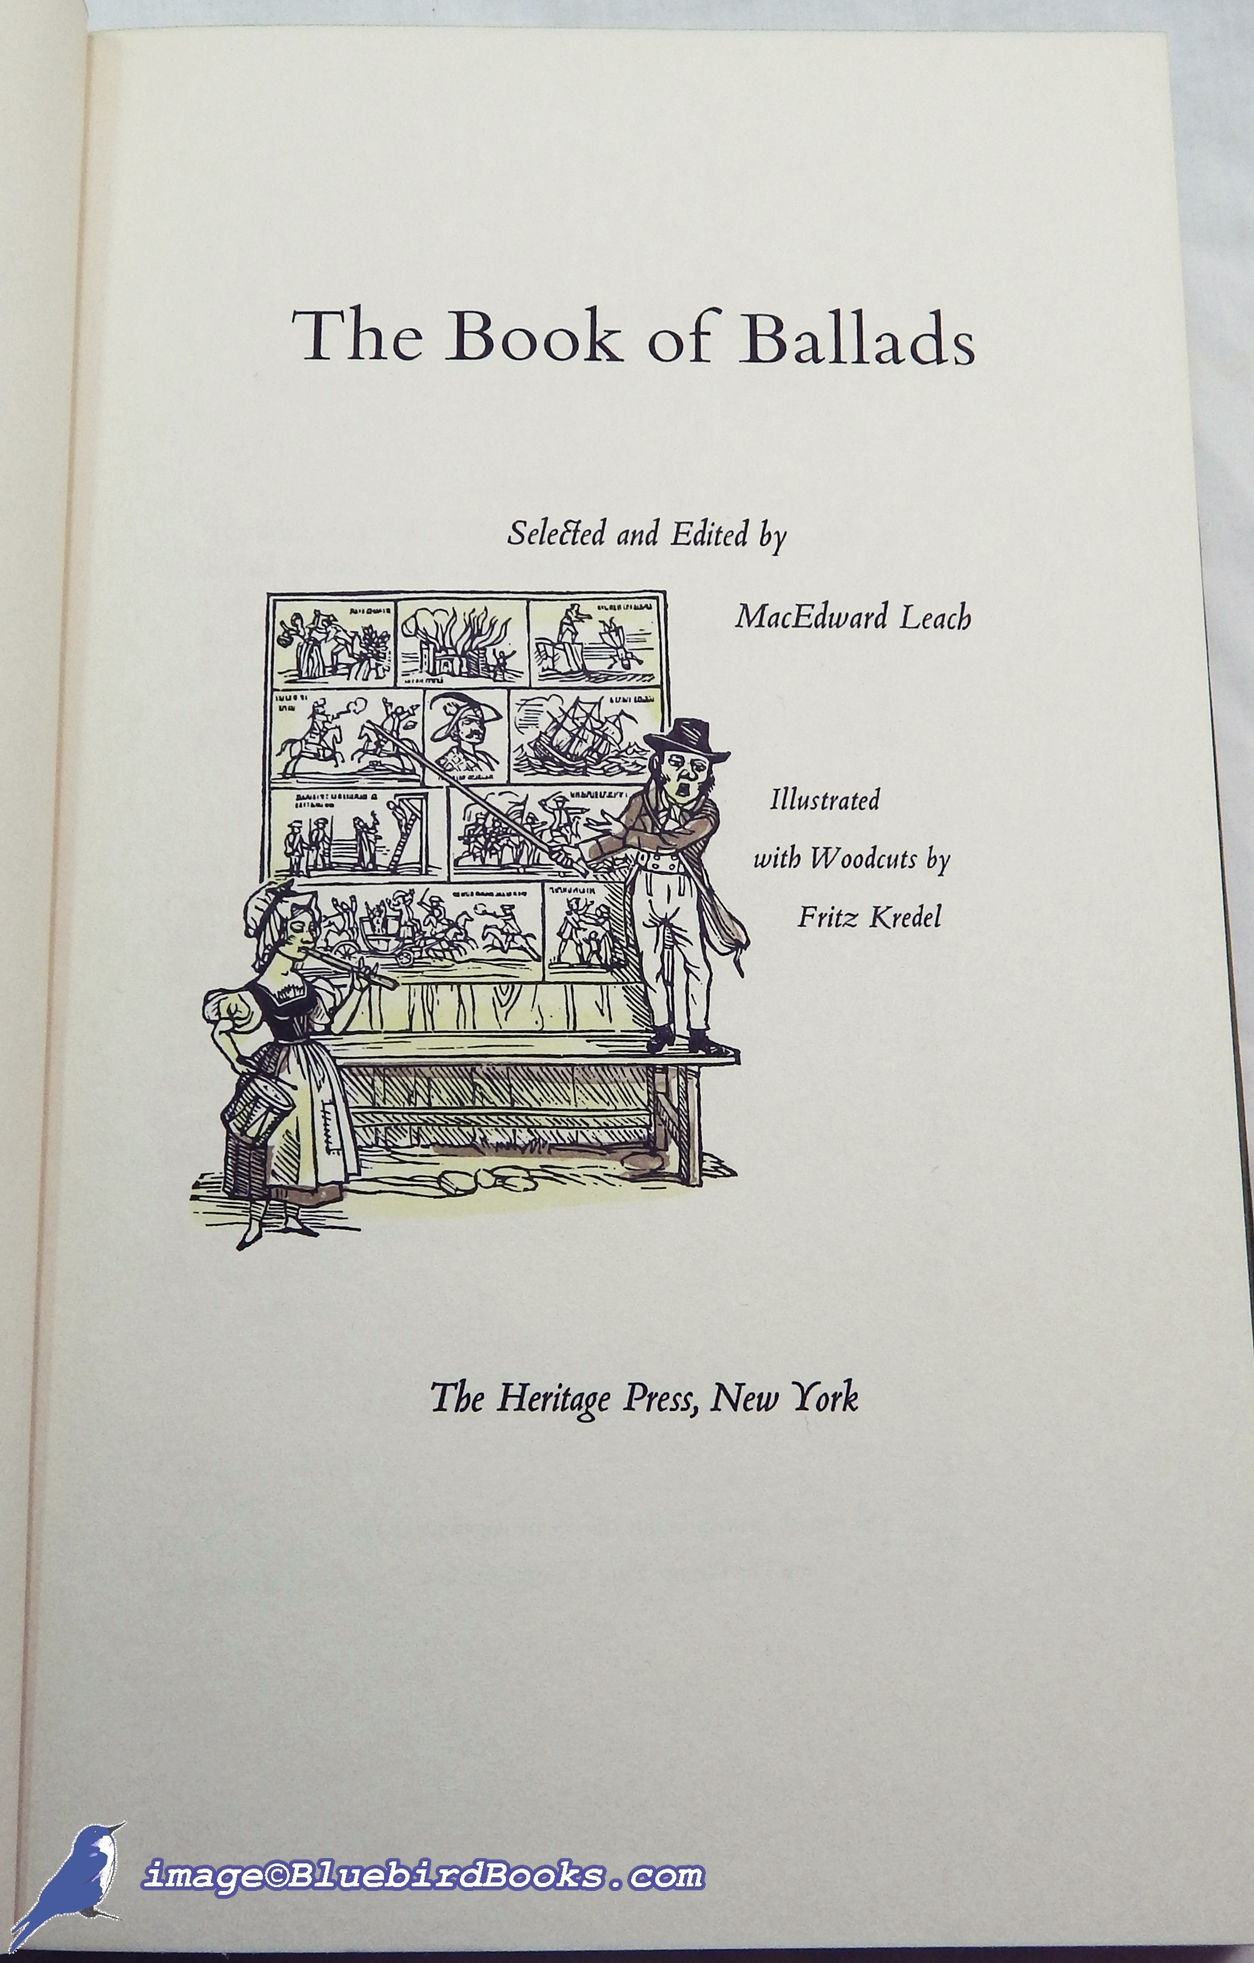 LEACH, MACEDWARD (SELECTOR AND EDITOR) - The Book of Ballads (the Heritage Book of Ballads)